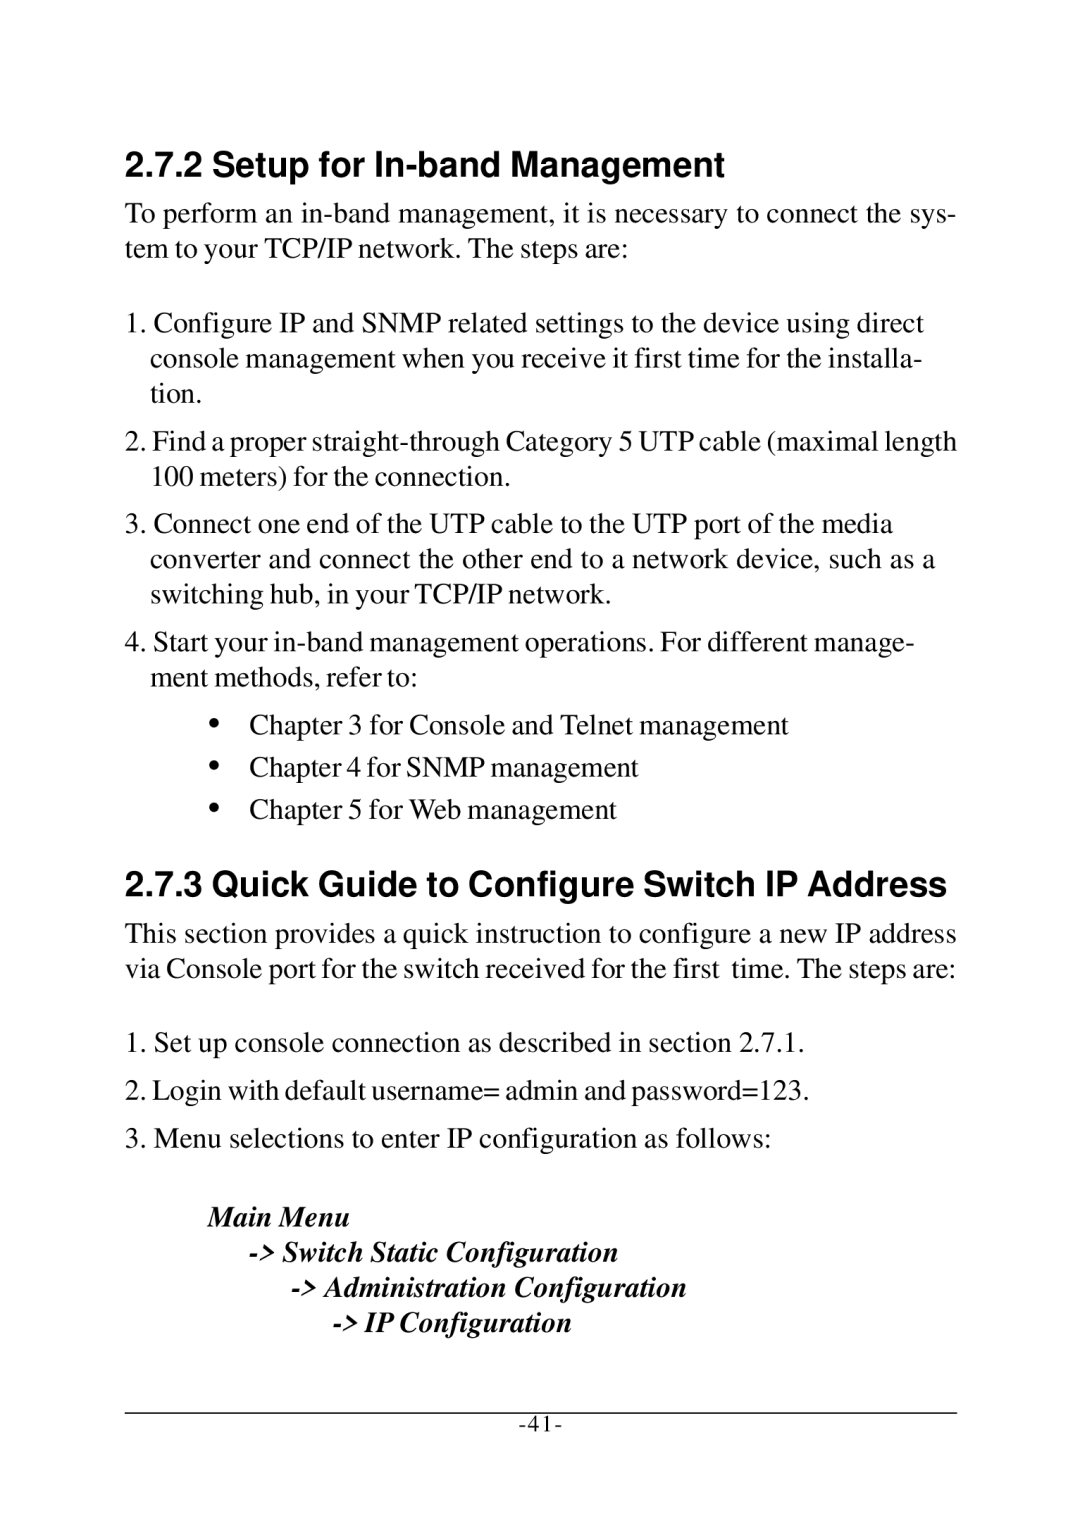 KTI Networks KS-2260 operation manual Setup for In-band Management, Quick Guide to Configure Switch IP Address 